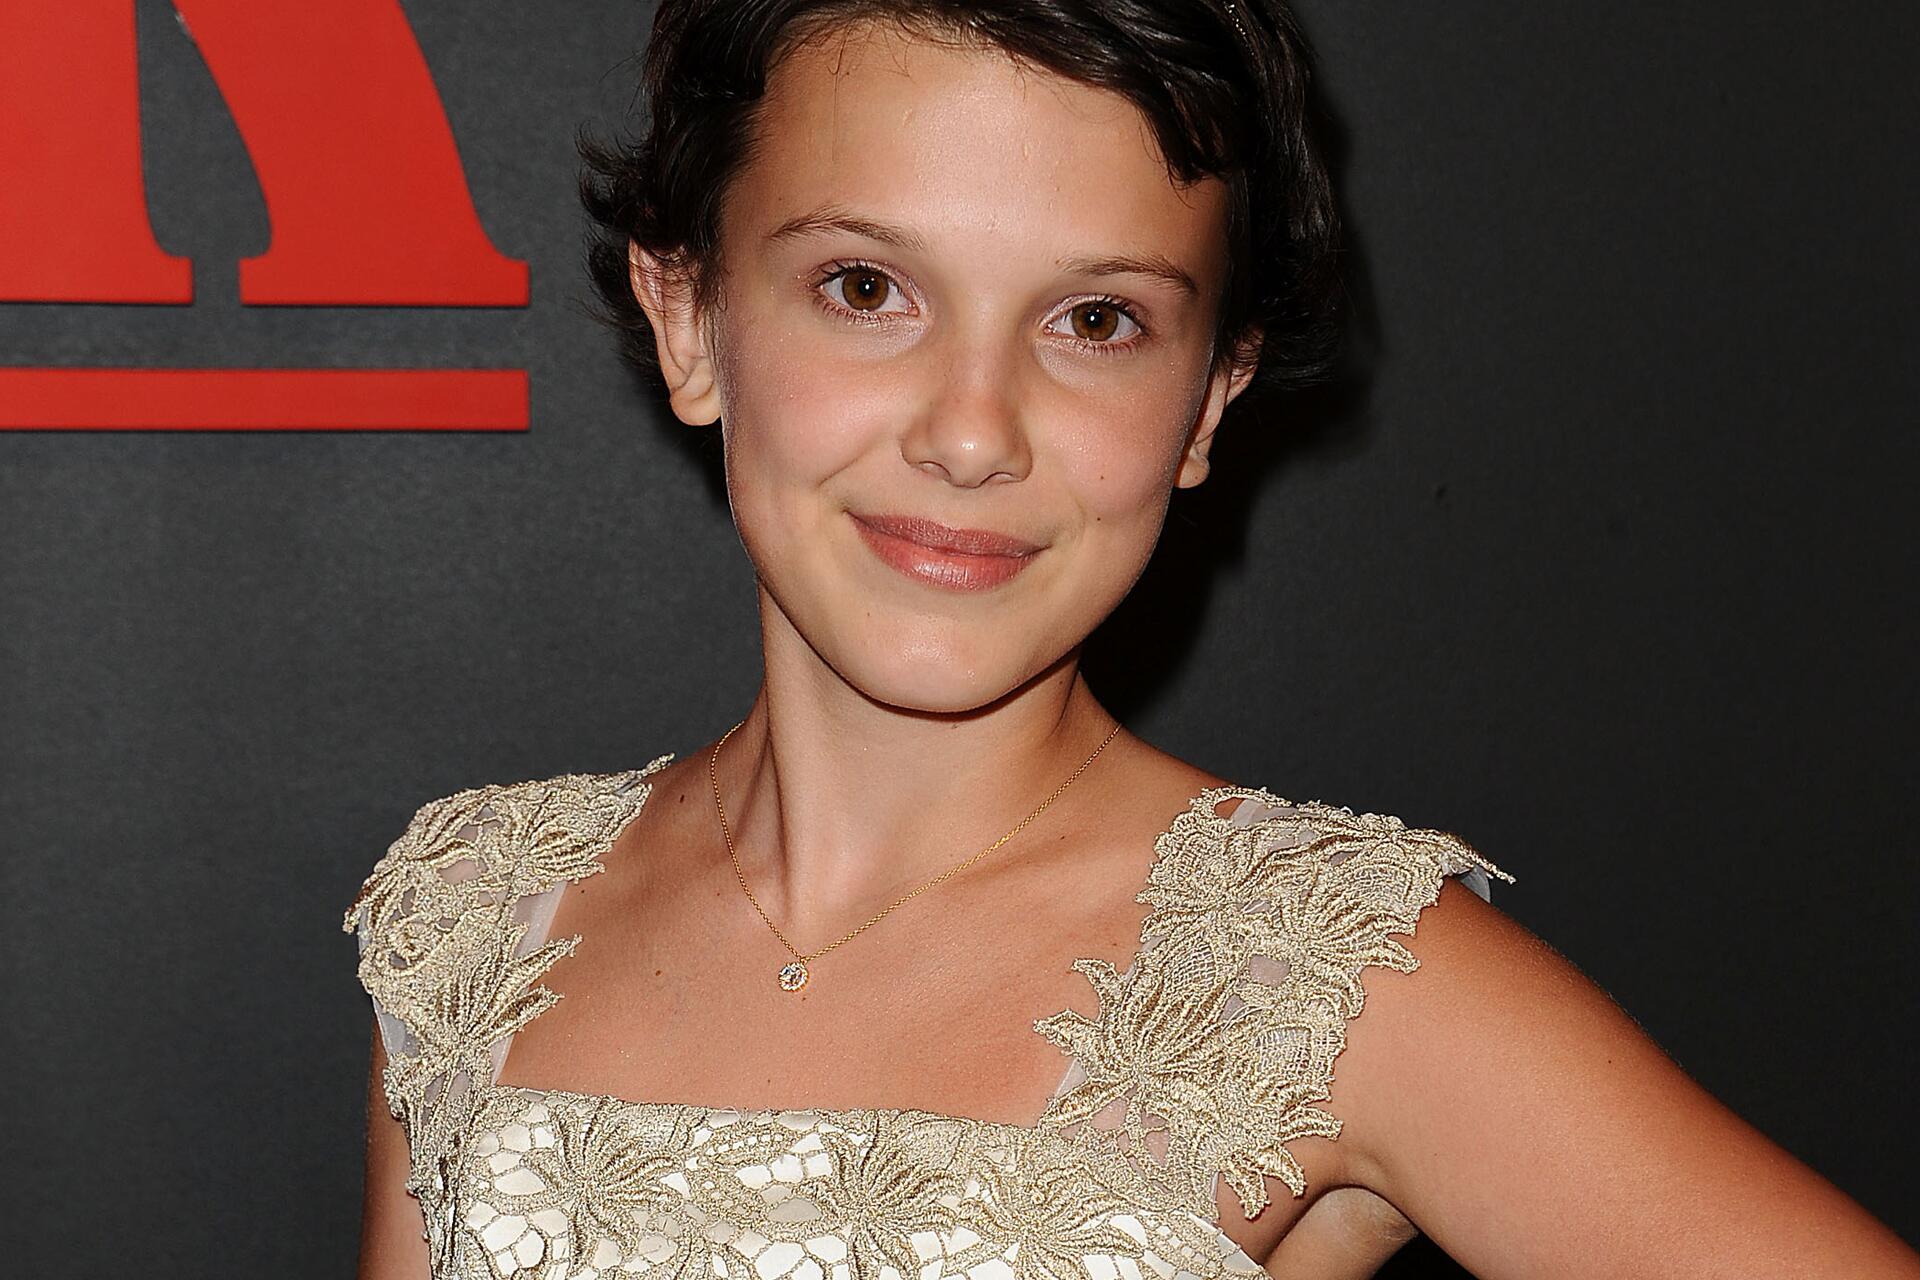 Awesome Millie Bobby Brown Cxfakes of all time Learn more here!